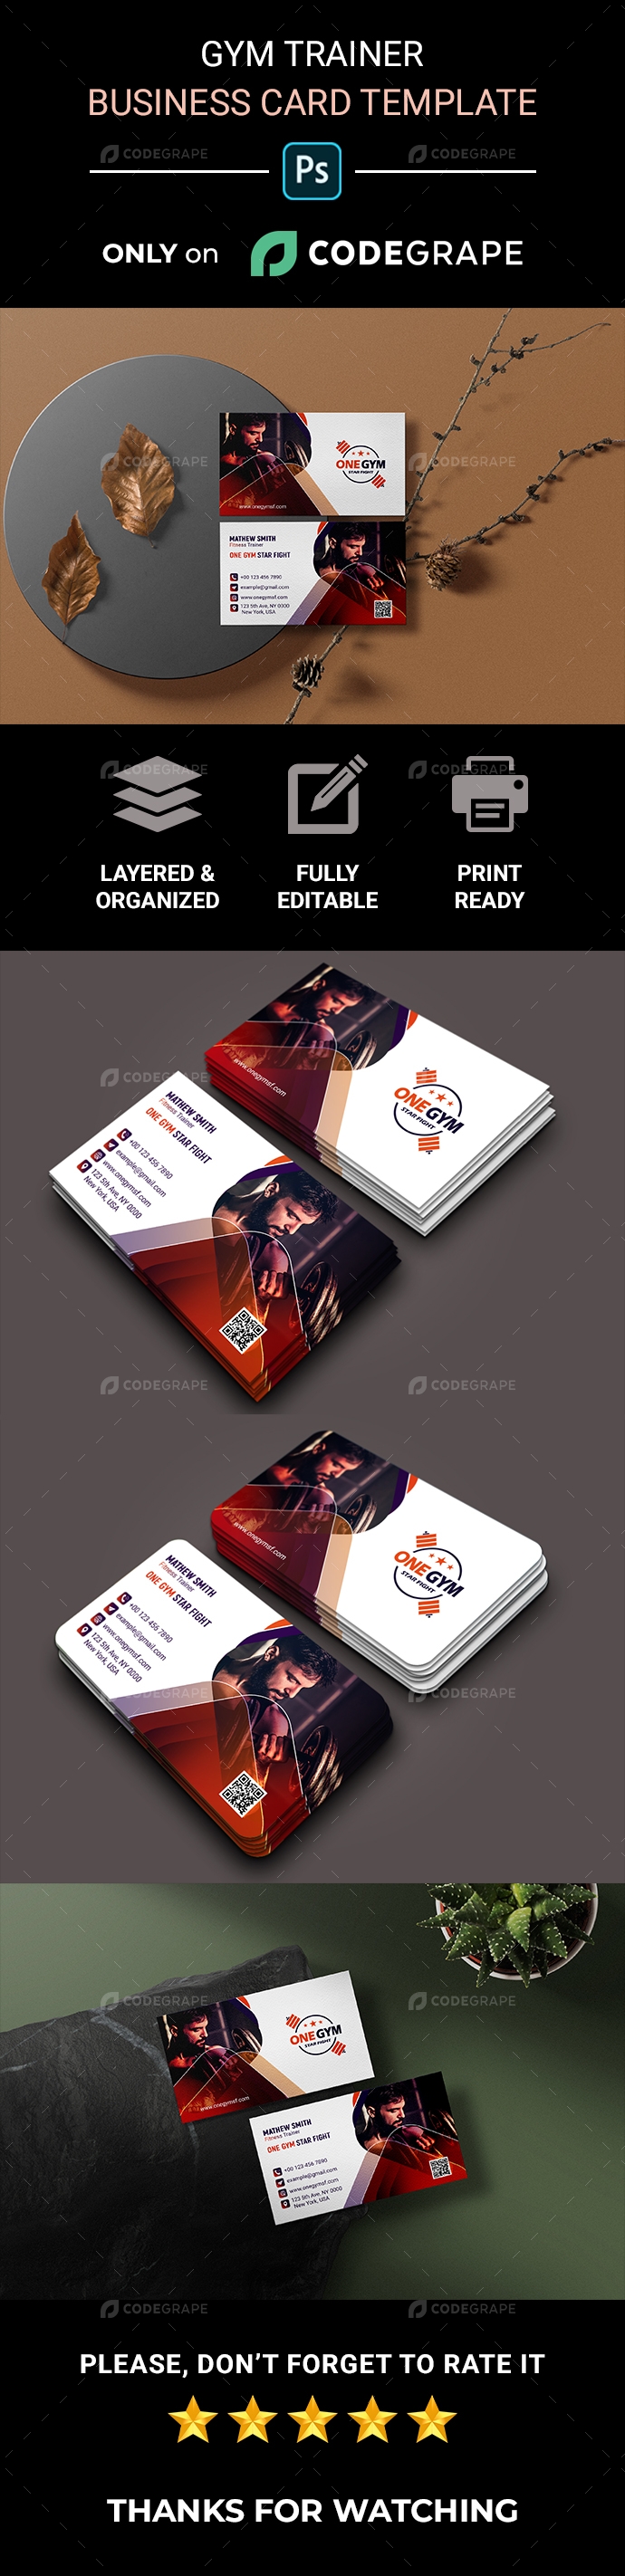 Gym Trainer Business Card